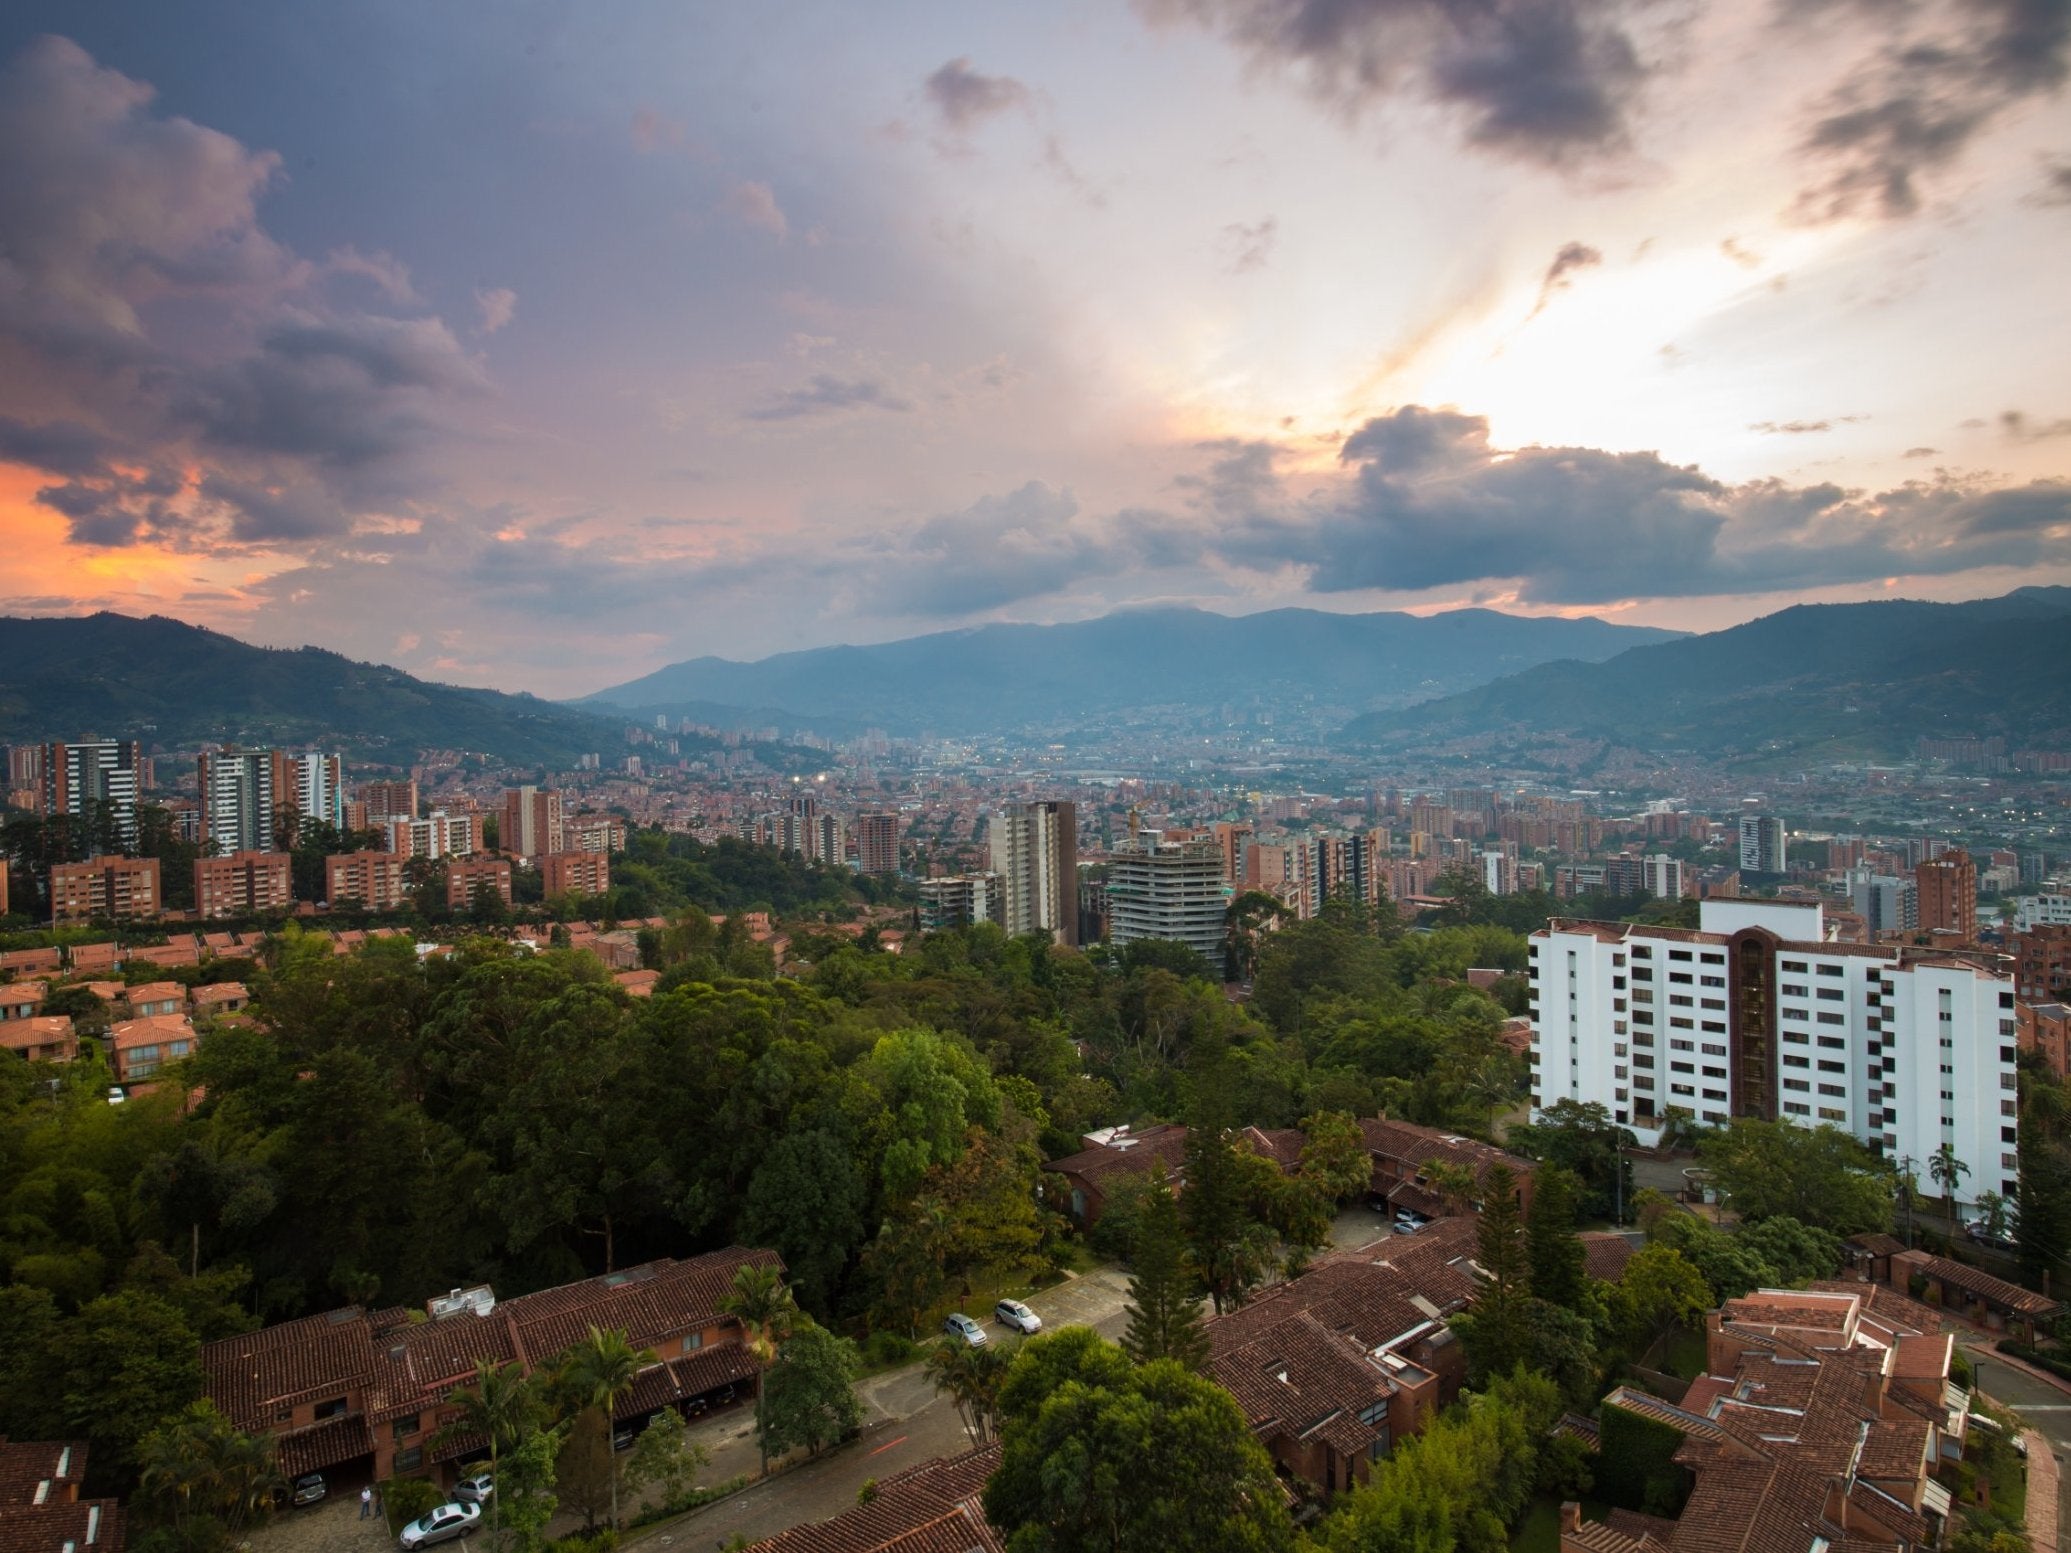 Once the most dangerous city in the world, Medellin is now safe to visit